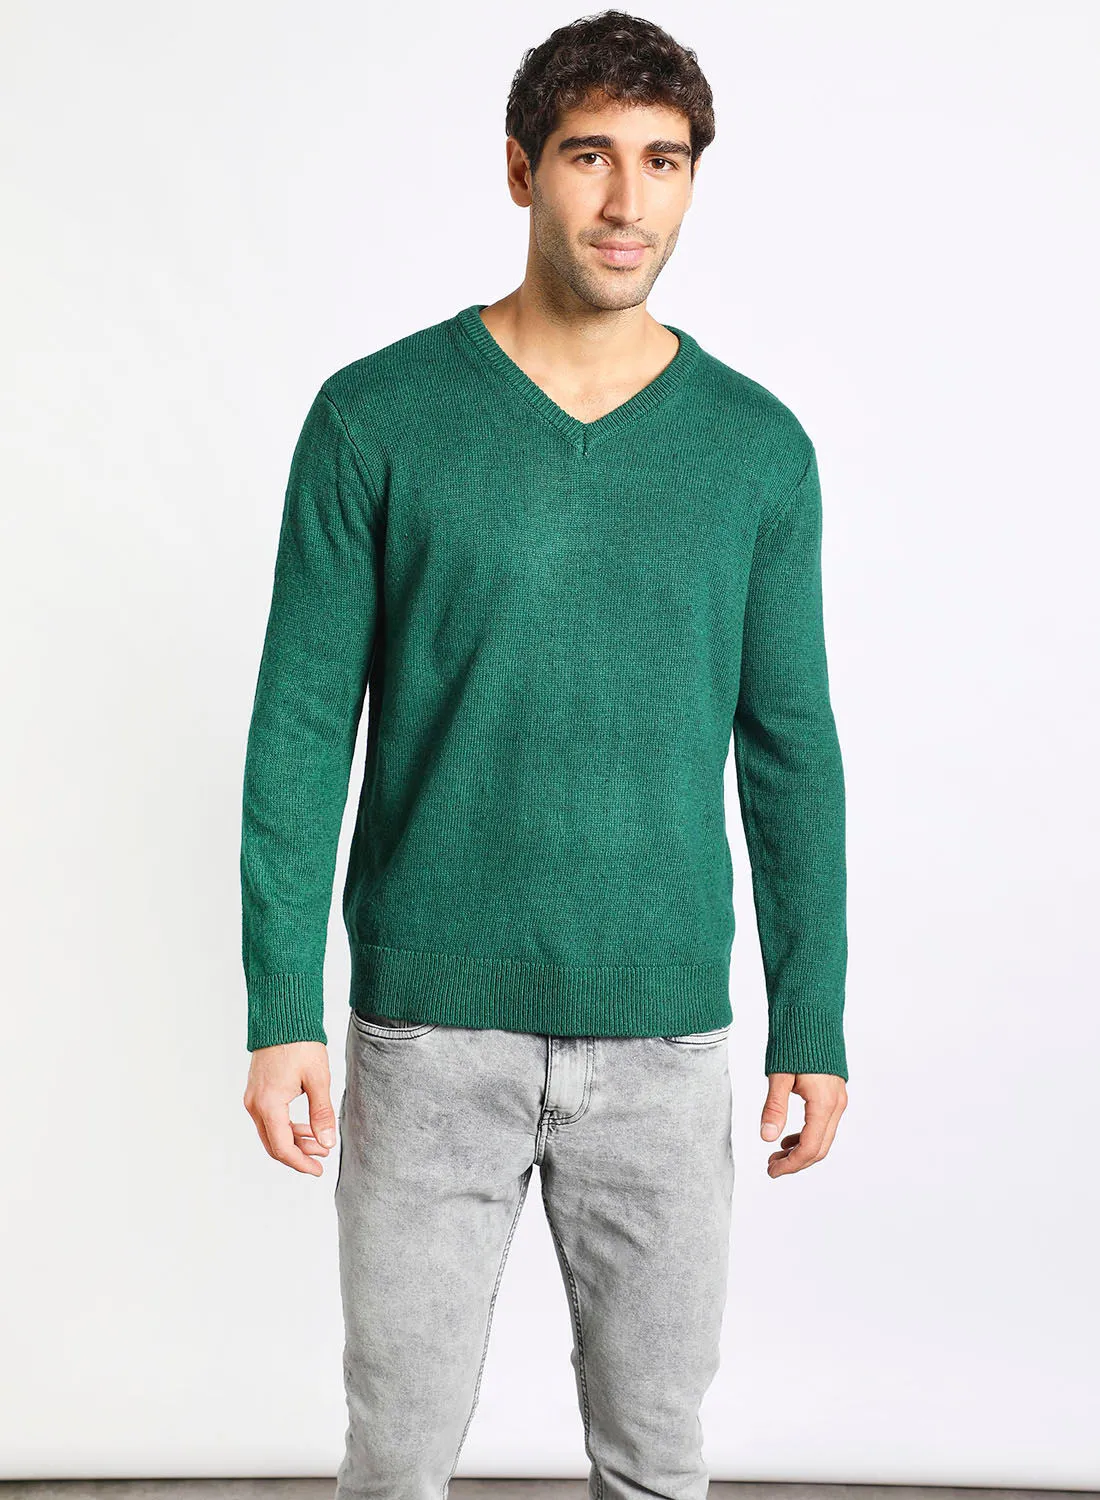 Noon East Men's Ribbed Knitted V-Neck Full Sleeves Warm Sweater For Winters Green